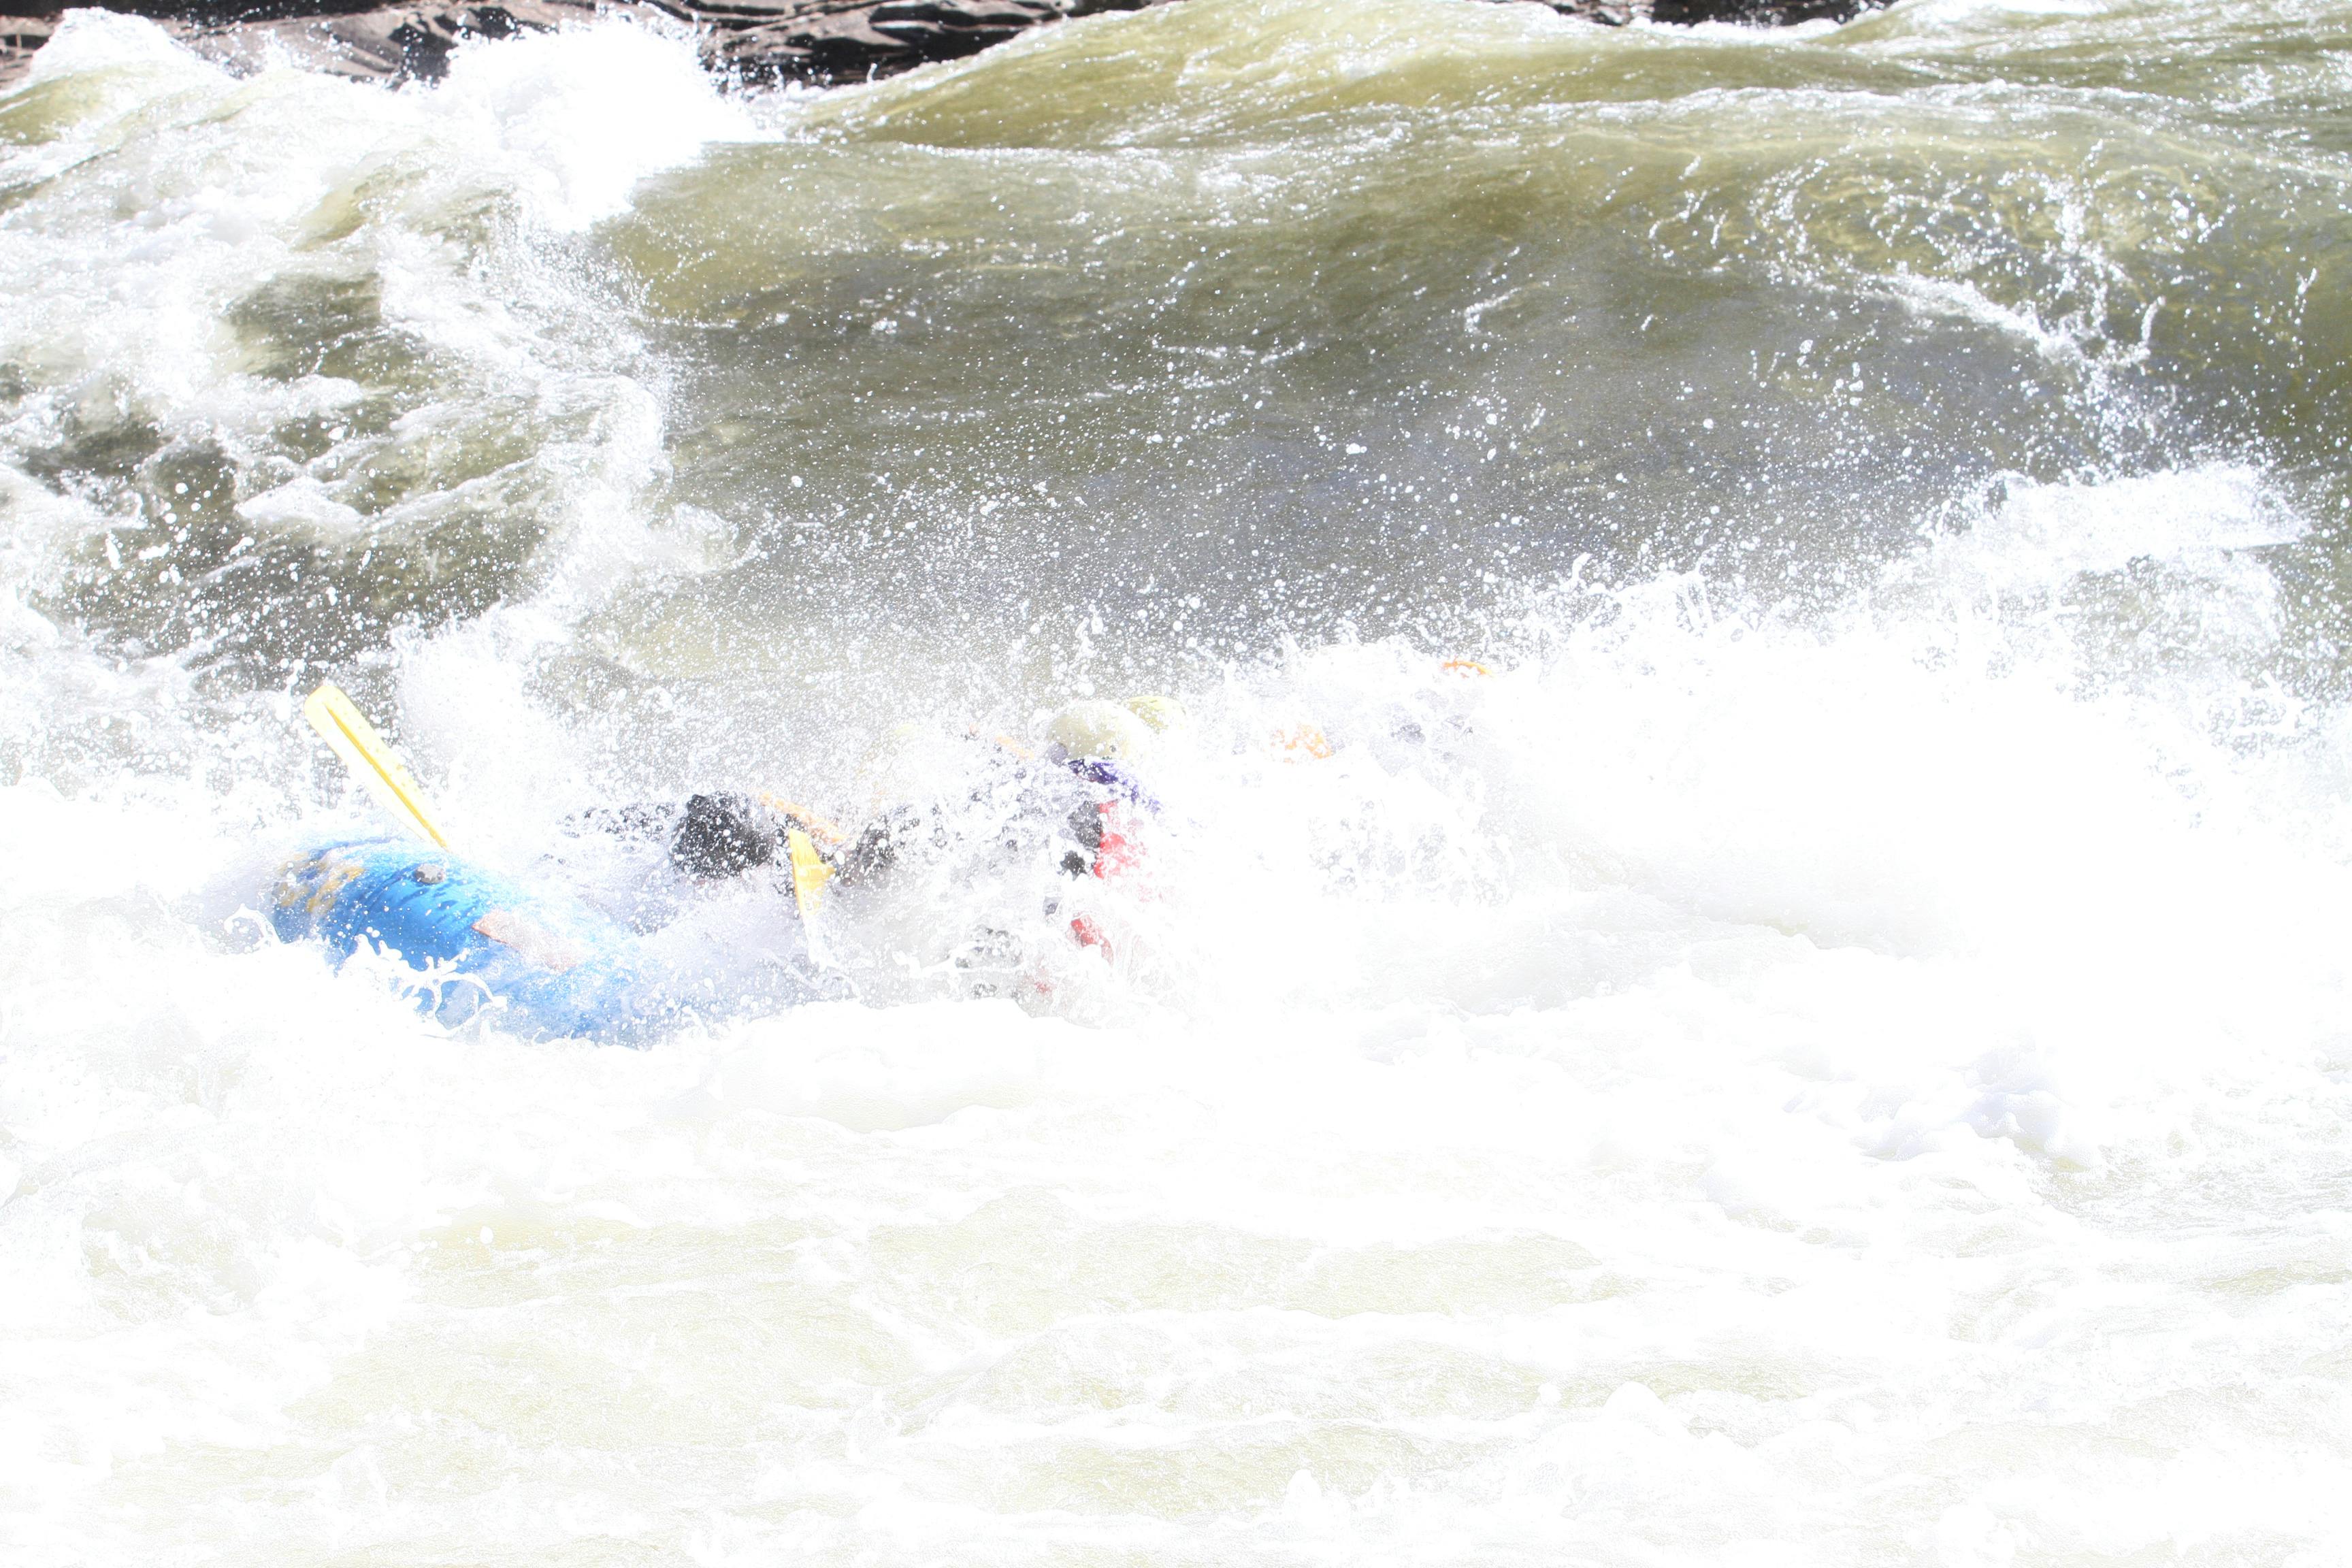 Whitewater rafters fall into the water